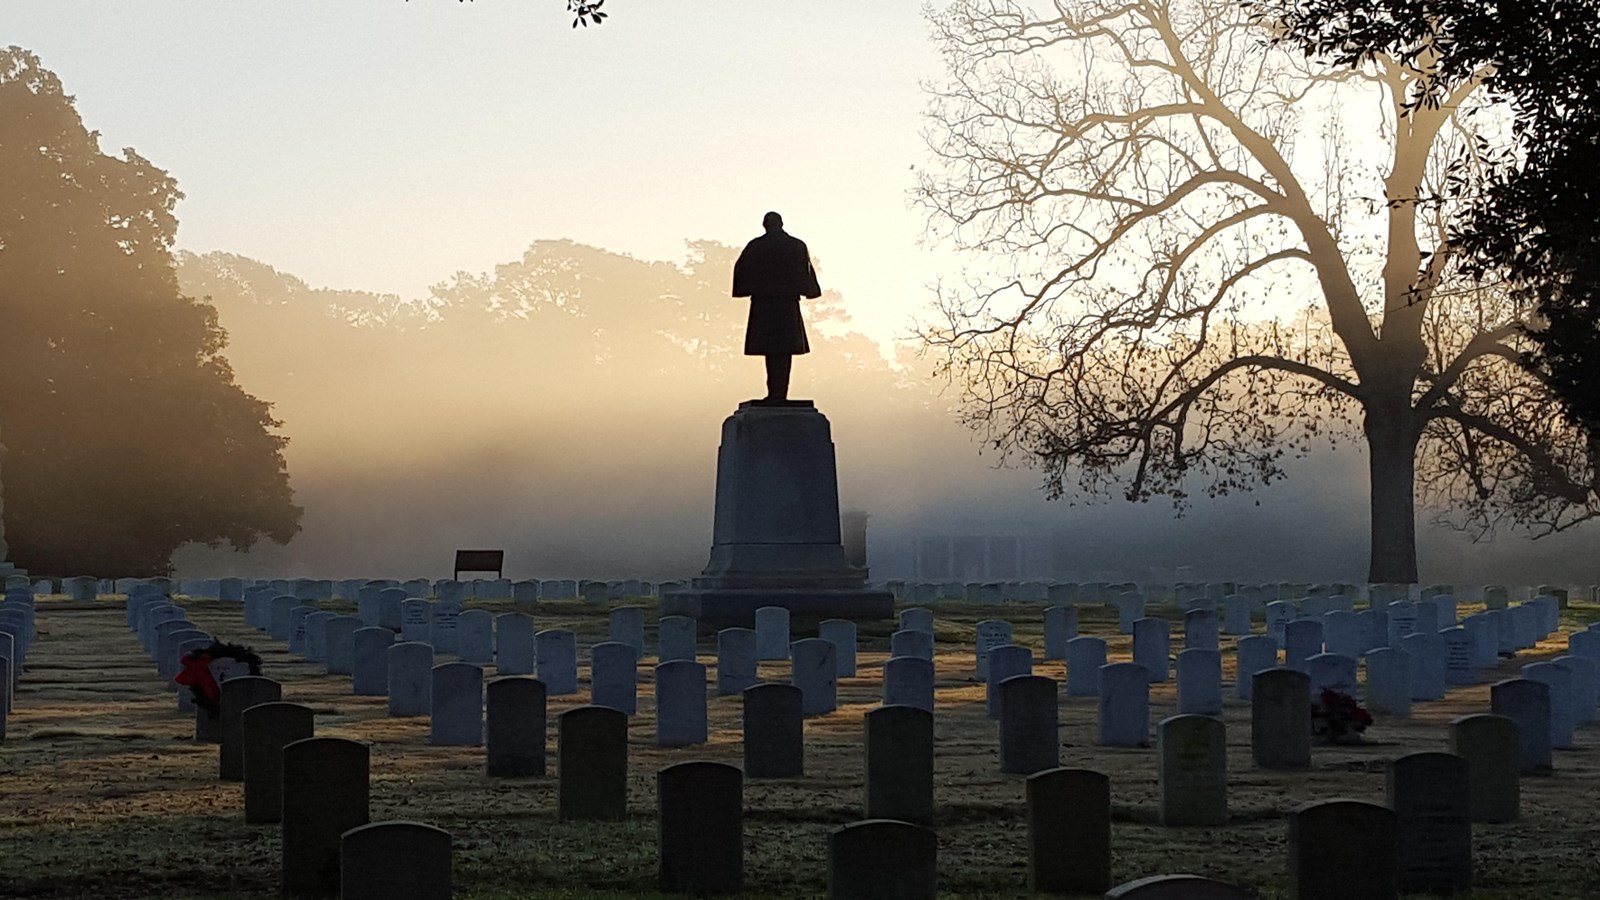 Statue of a soldier standing over graves in a cemetery